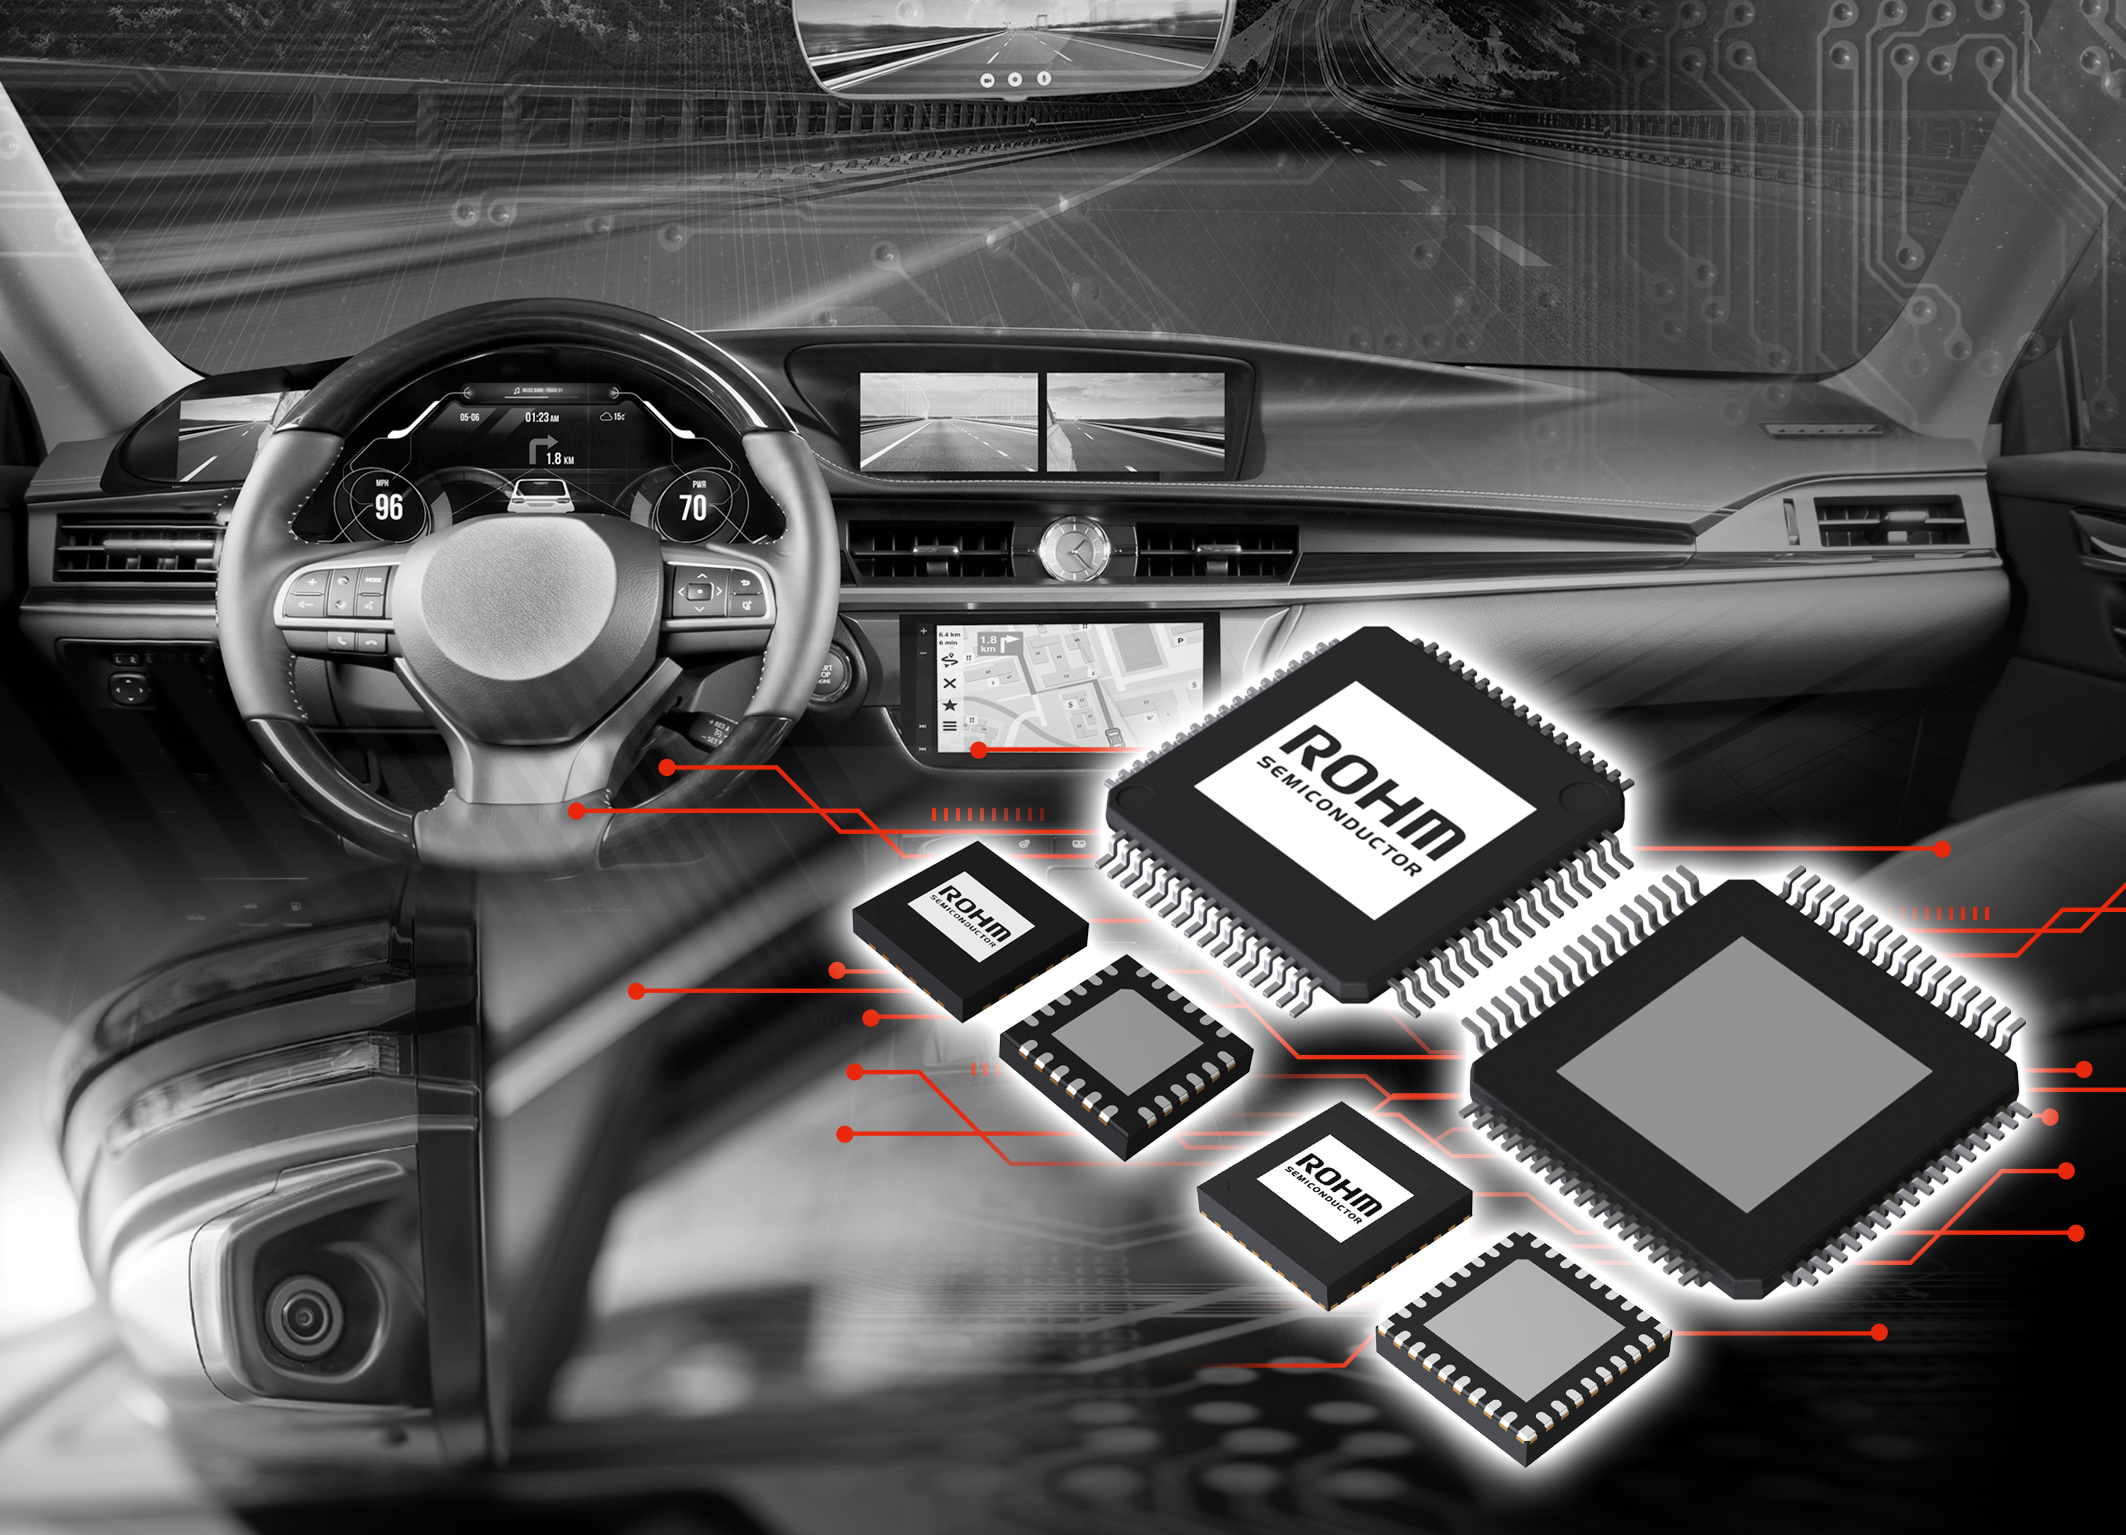 ROHM’s new BU18xMxx-C series SerDes ICs and BD86852MUF-C PMIC are ideal for ADAS and satellite camera modules